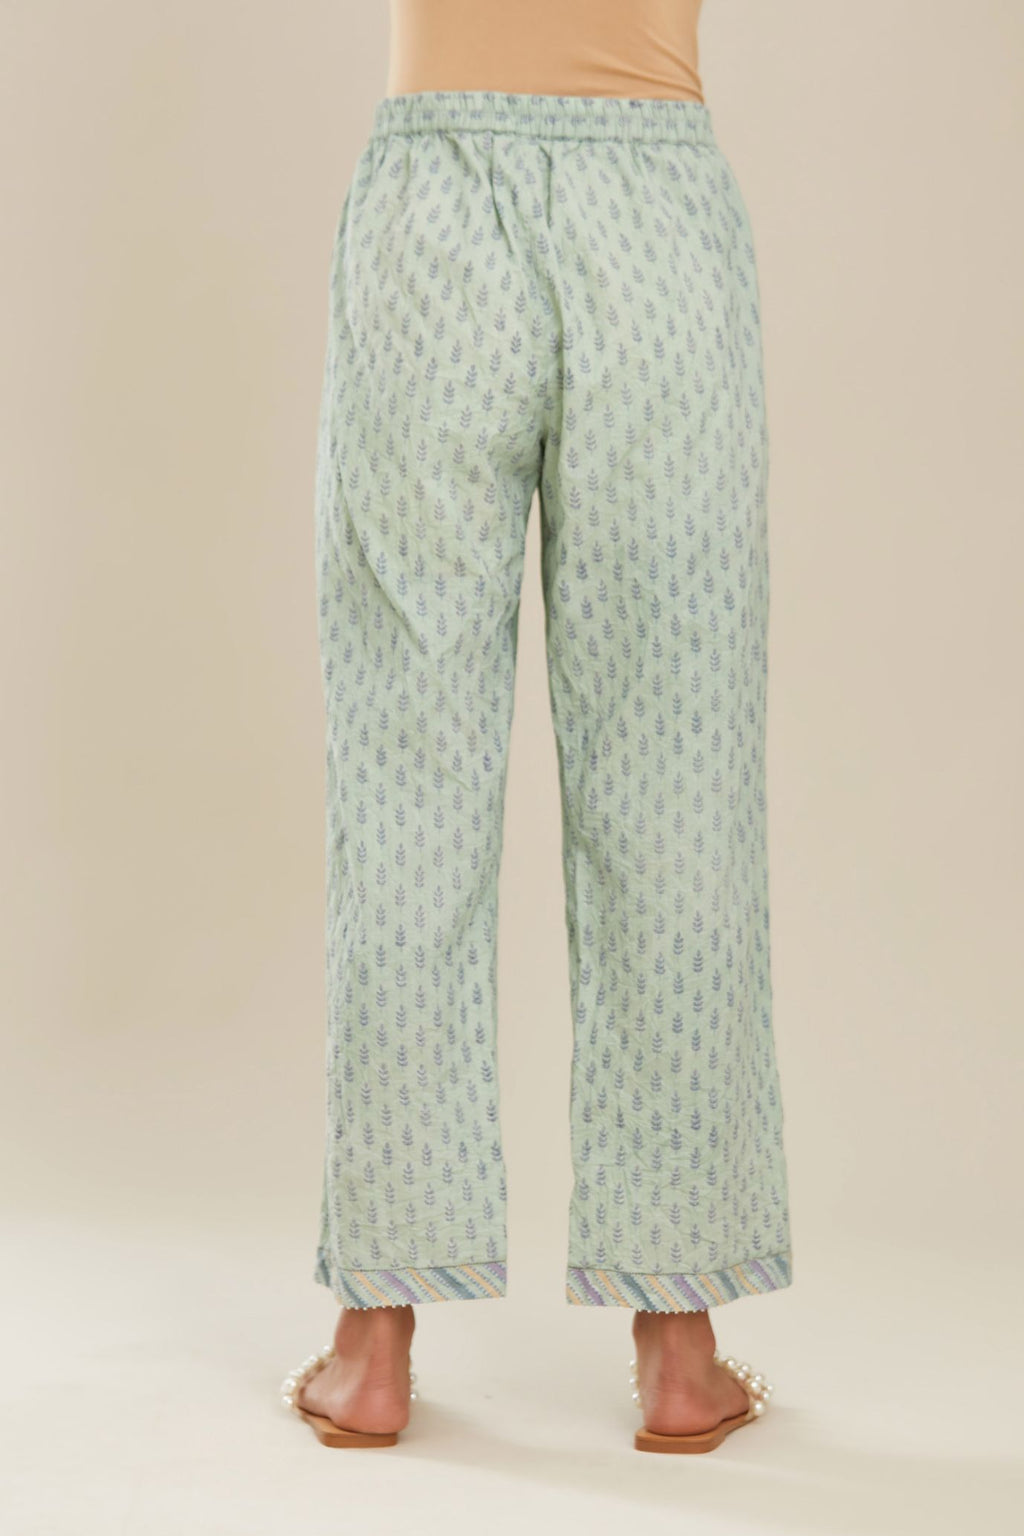 Blue hand block printed straight pants with striped fabric attached at bottom with faggoting and highlighted with hand attached beads. (PANTS)